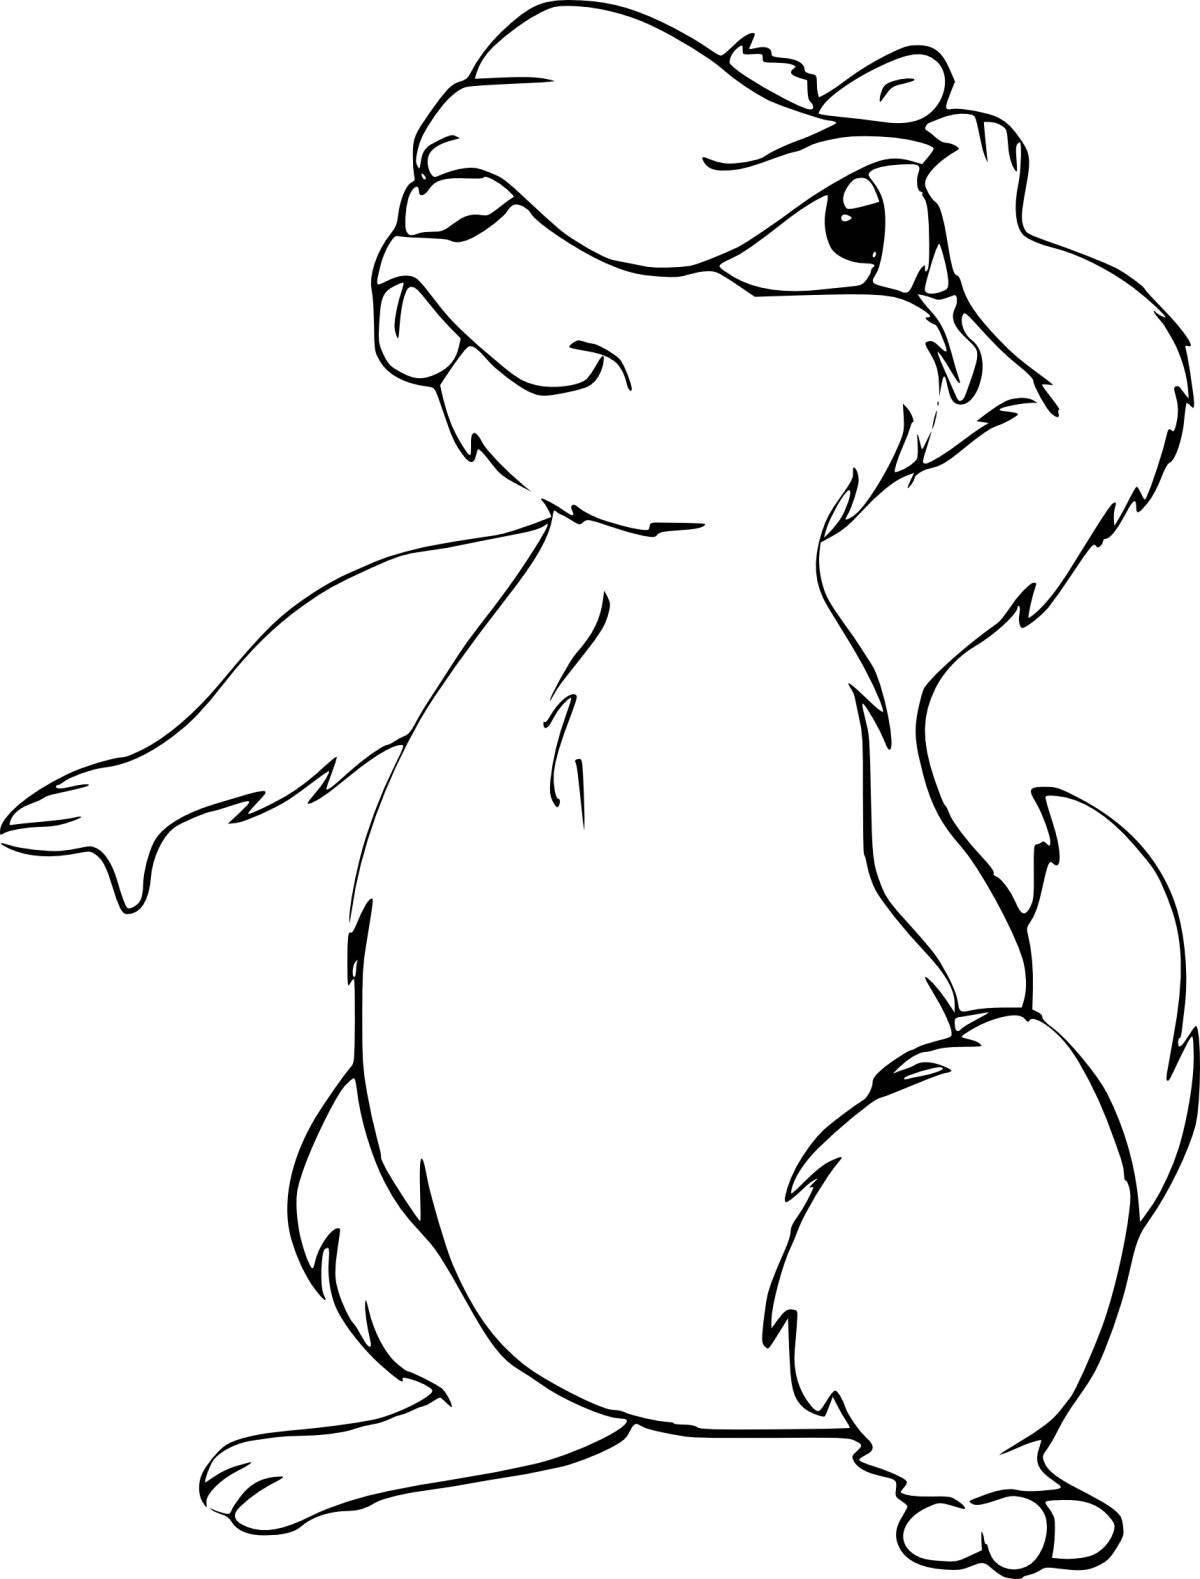 Colorful speckled gopher coloring page